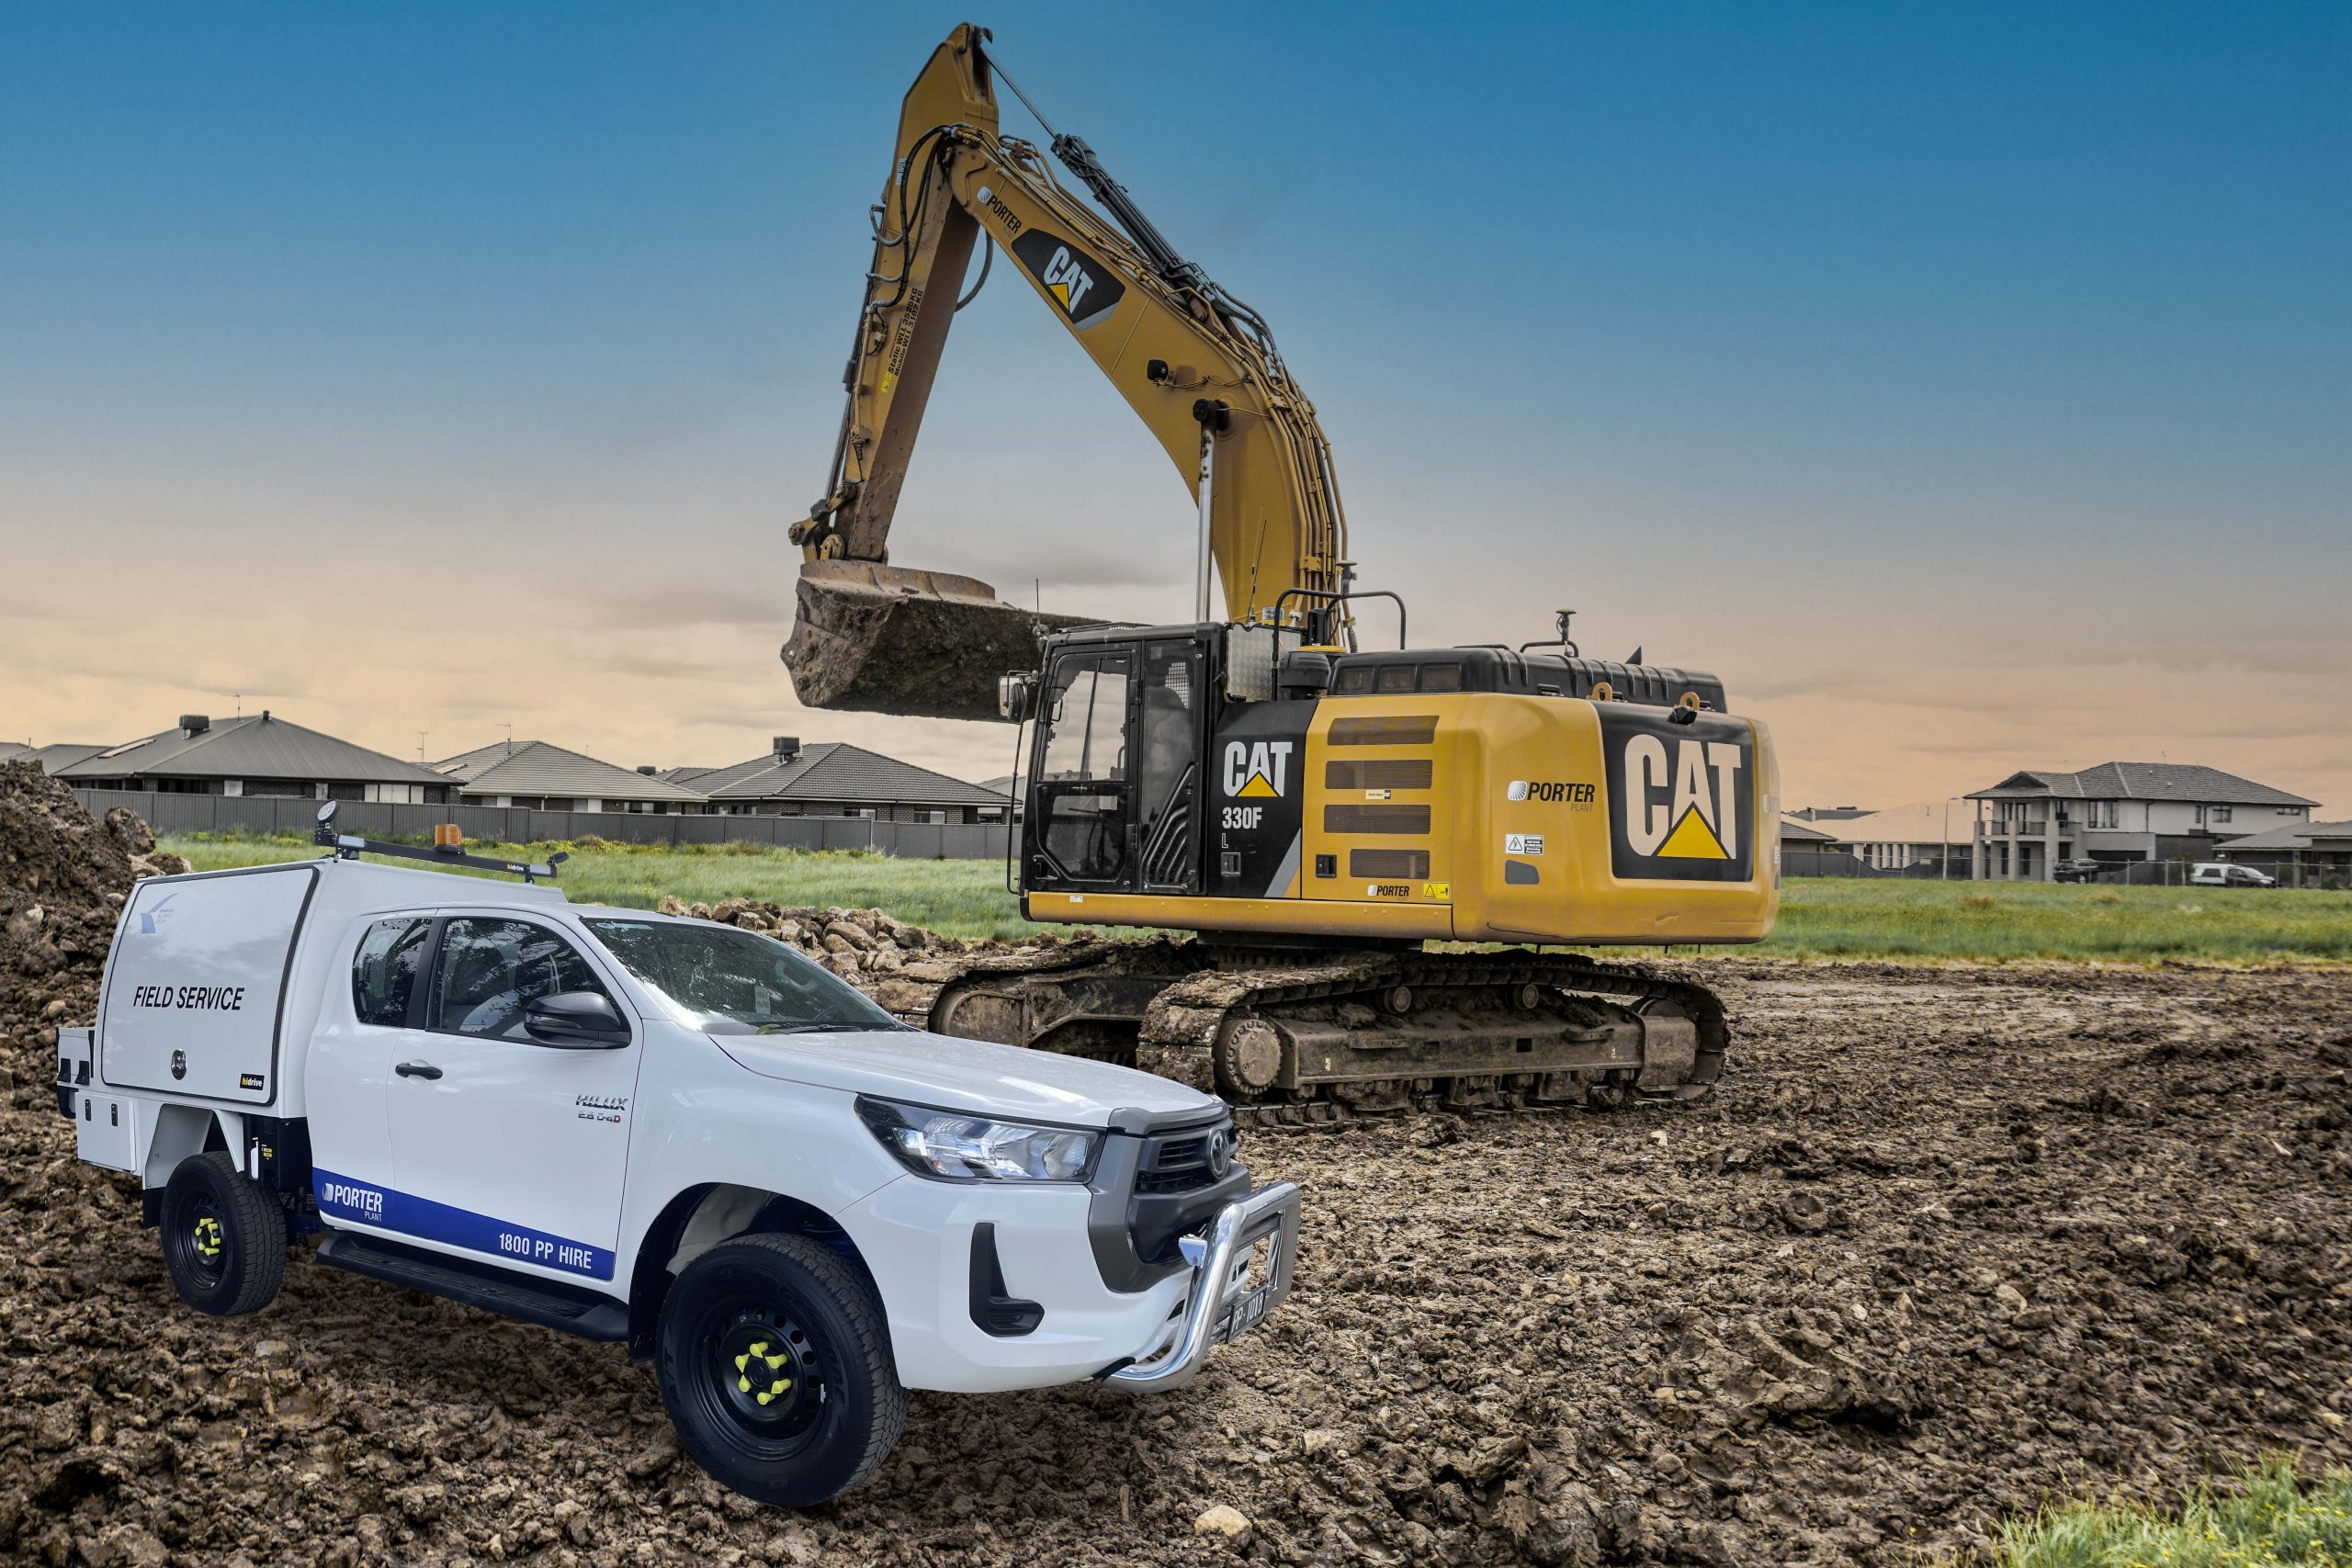 From light commercial vehicles, passenger fleets, earthmoving equipment, utility service vehicles to bespoke solutions that are industry specific, Porter Plant have the expertise, drive and commitment to provide our customers with the equipment and fleet services that is required to get the job done!